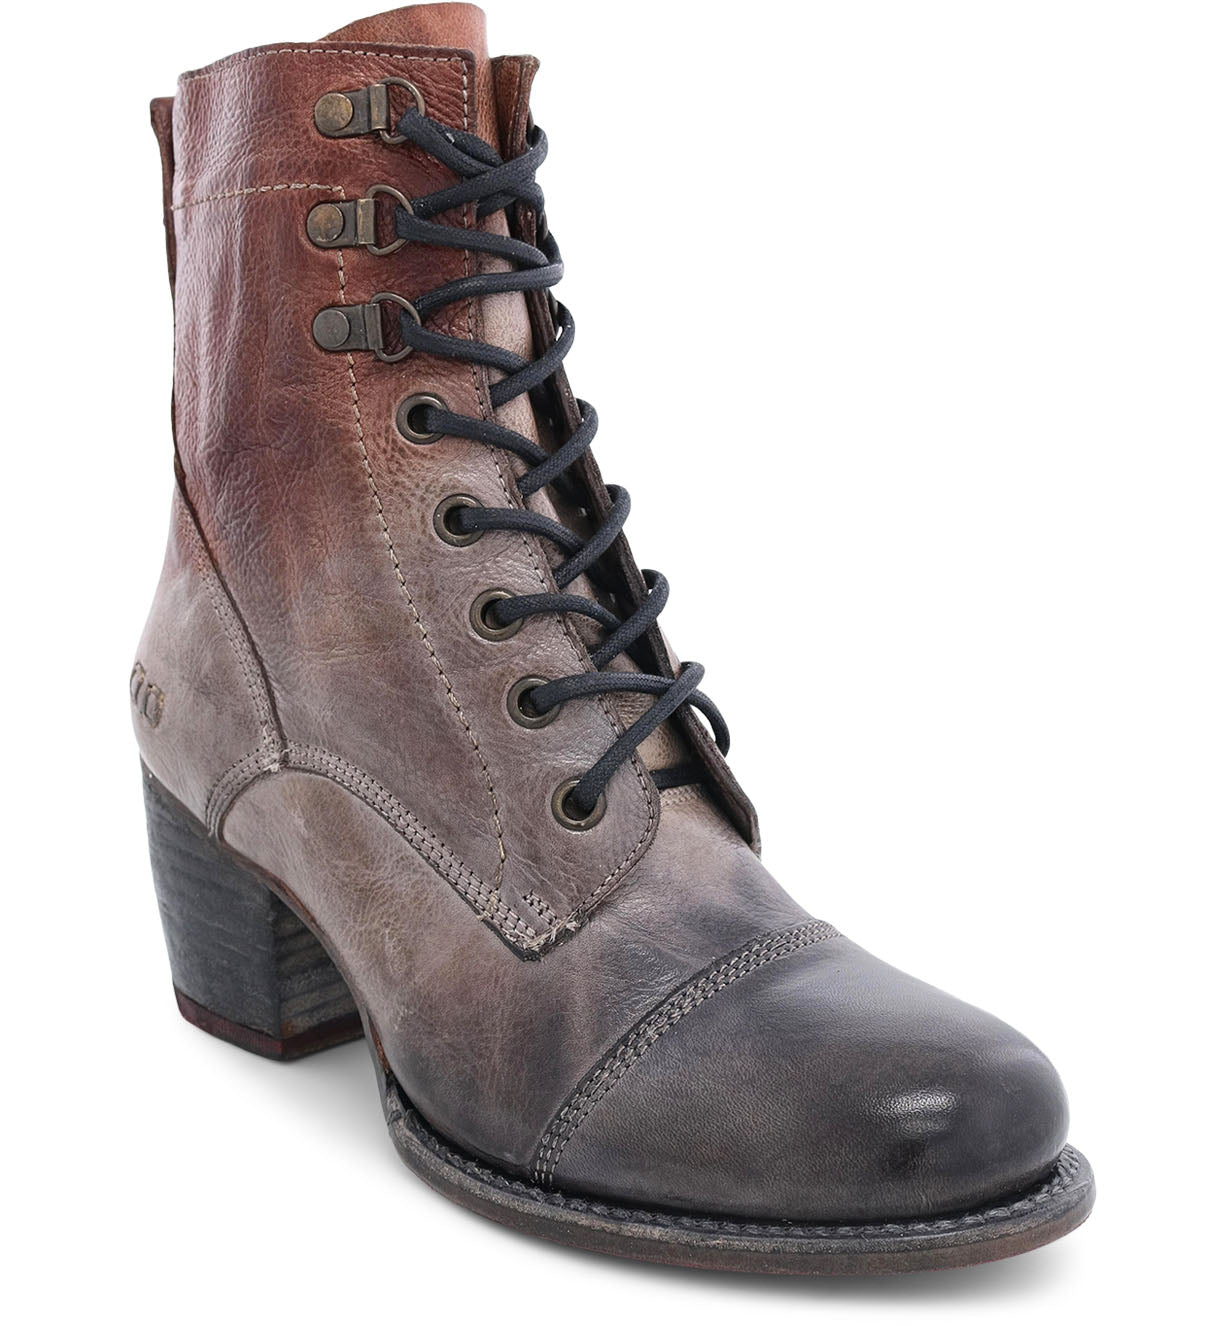 A women's grey ankle boot with laces called Judgement by Bed Stu.